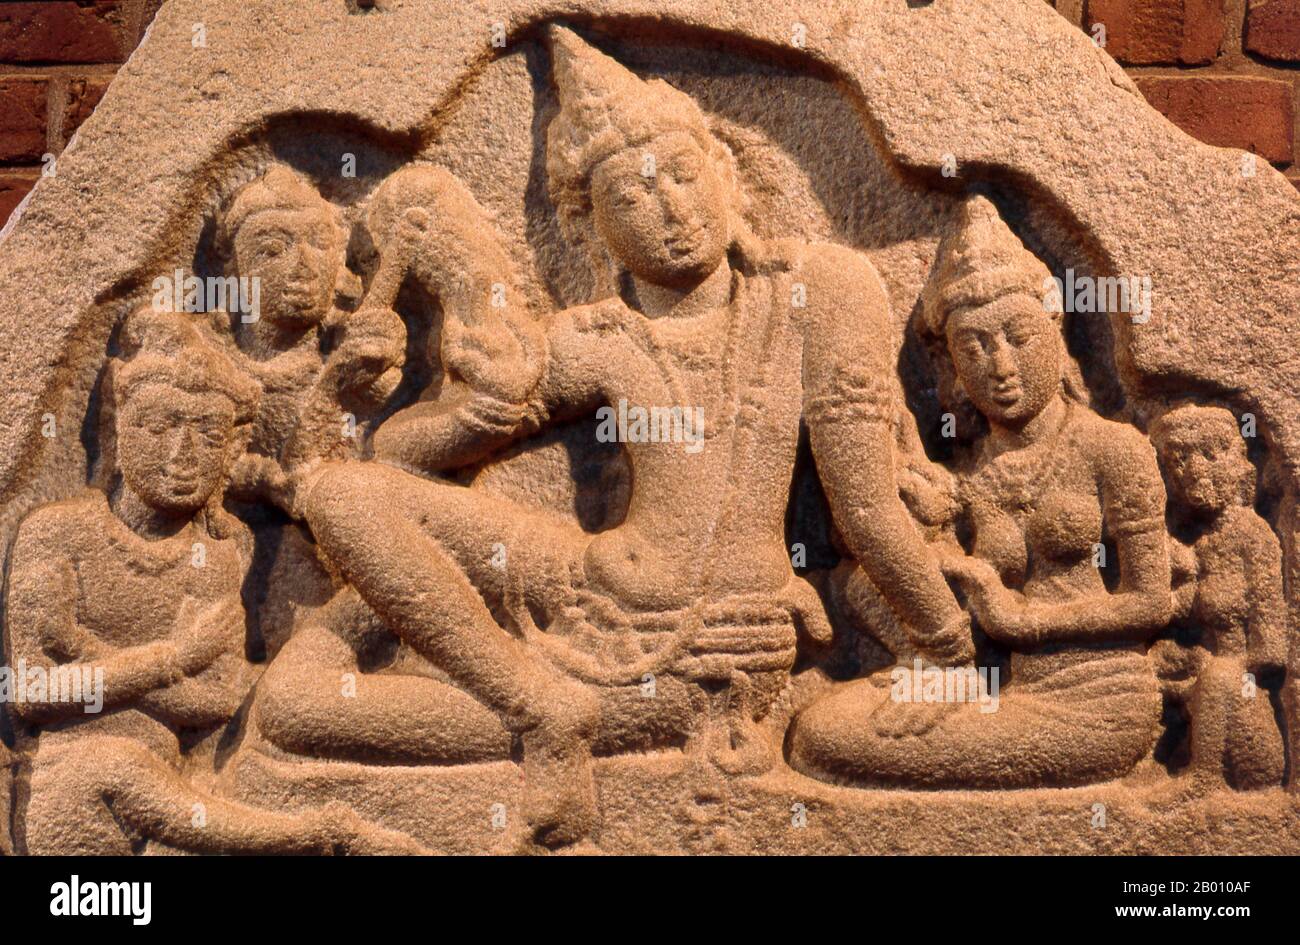 Sri Lanka: Frieze of royal family, Isurumuniya temple museum, Anuradhapura.  Isurumuniya Vihara is a rock temple built during the reign of King Devanampiya Tissa (r. 307 - 267 BCE).  Anuradhapura is one of Sri Lanka's ancient capitals and famous for its well-preserved ruins. From the 4th century BCE until the beginning of the 11th century CE it was the capital. During this period it remained one of the most stable and durable centers of political power and urban life in South Asia. The ancient city, considered sacred to the Buddhist world, is today surrounded by monasteries. Stock Photo